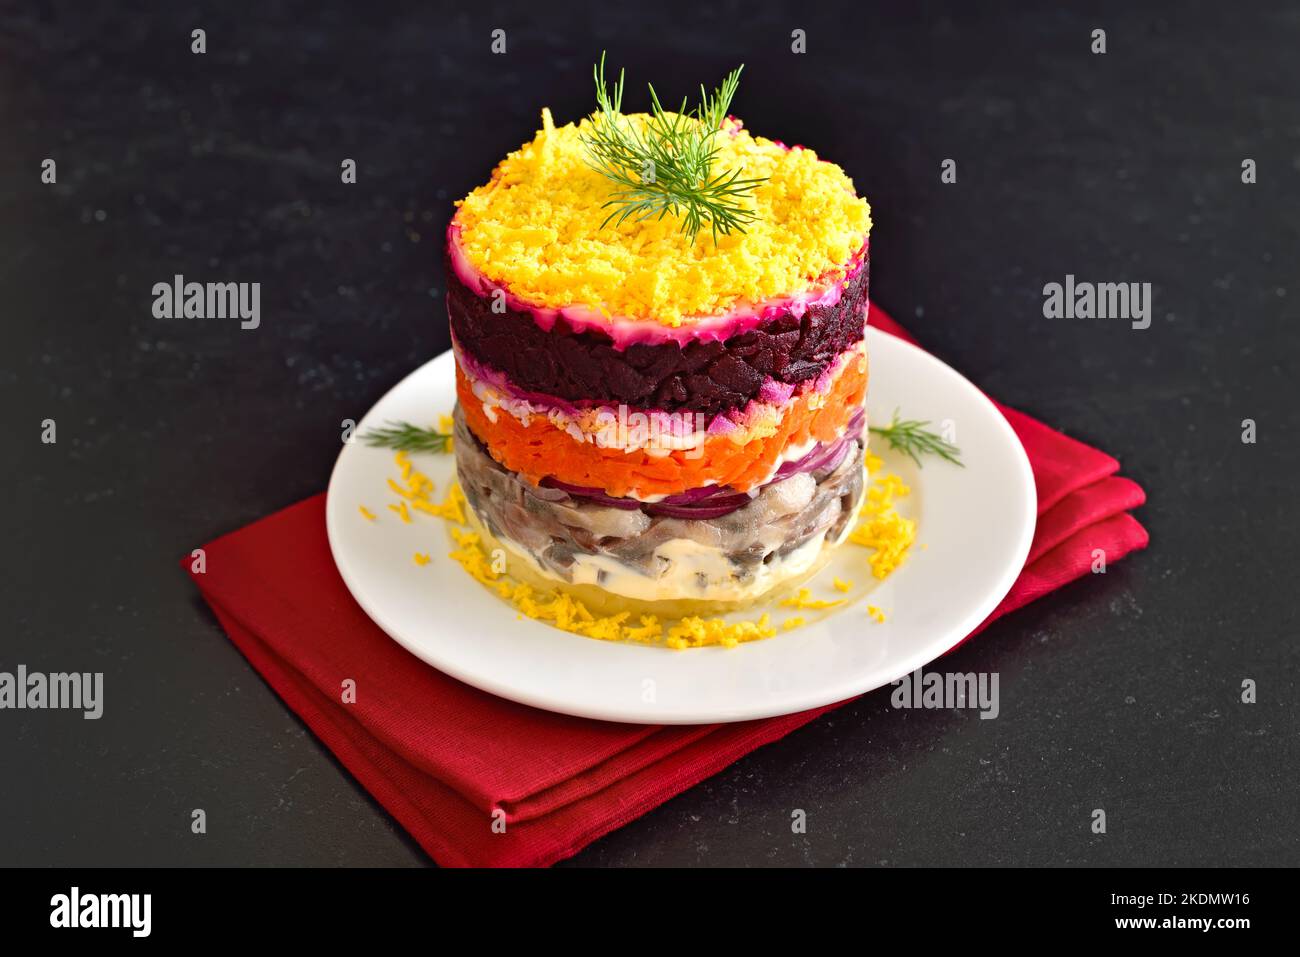 Layered salad with beet, herring, carrots and potatoes, close up view Stock Photo